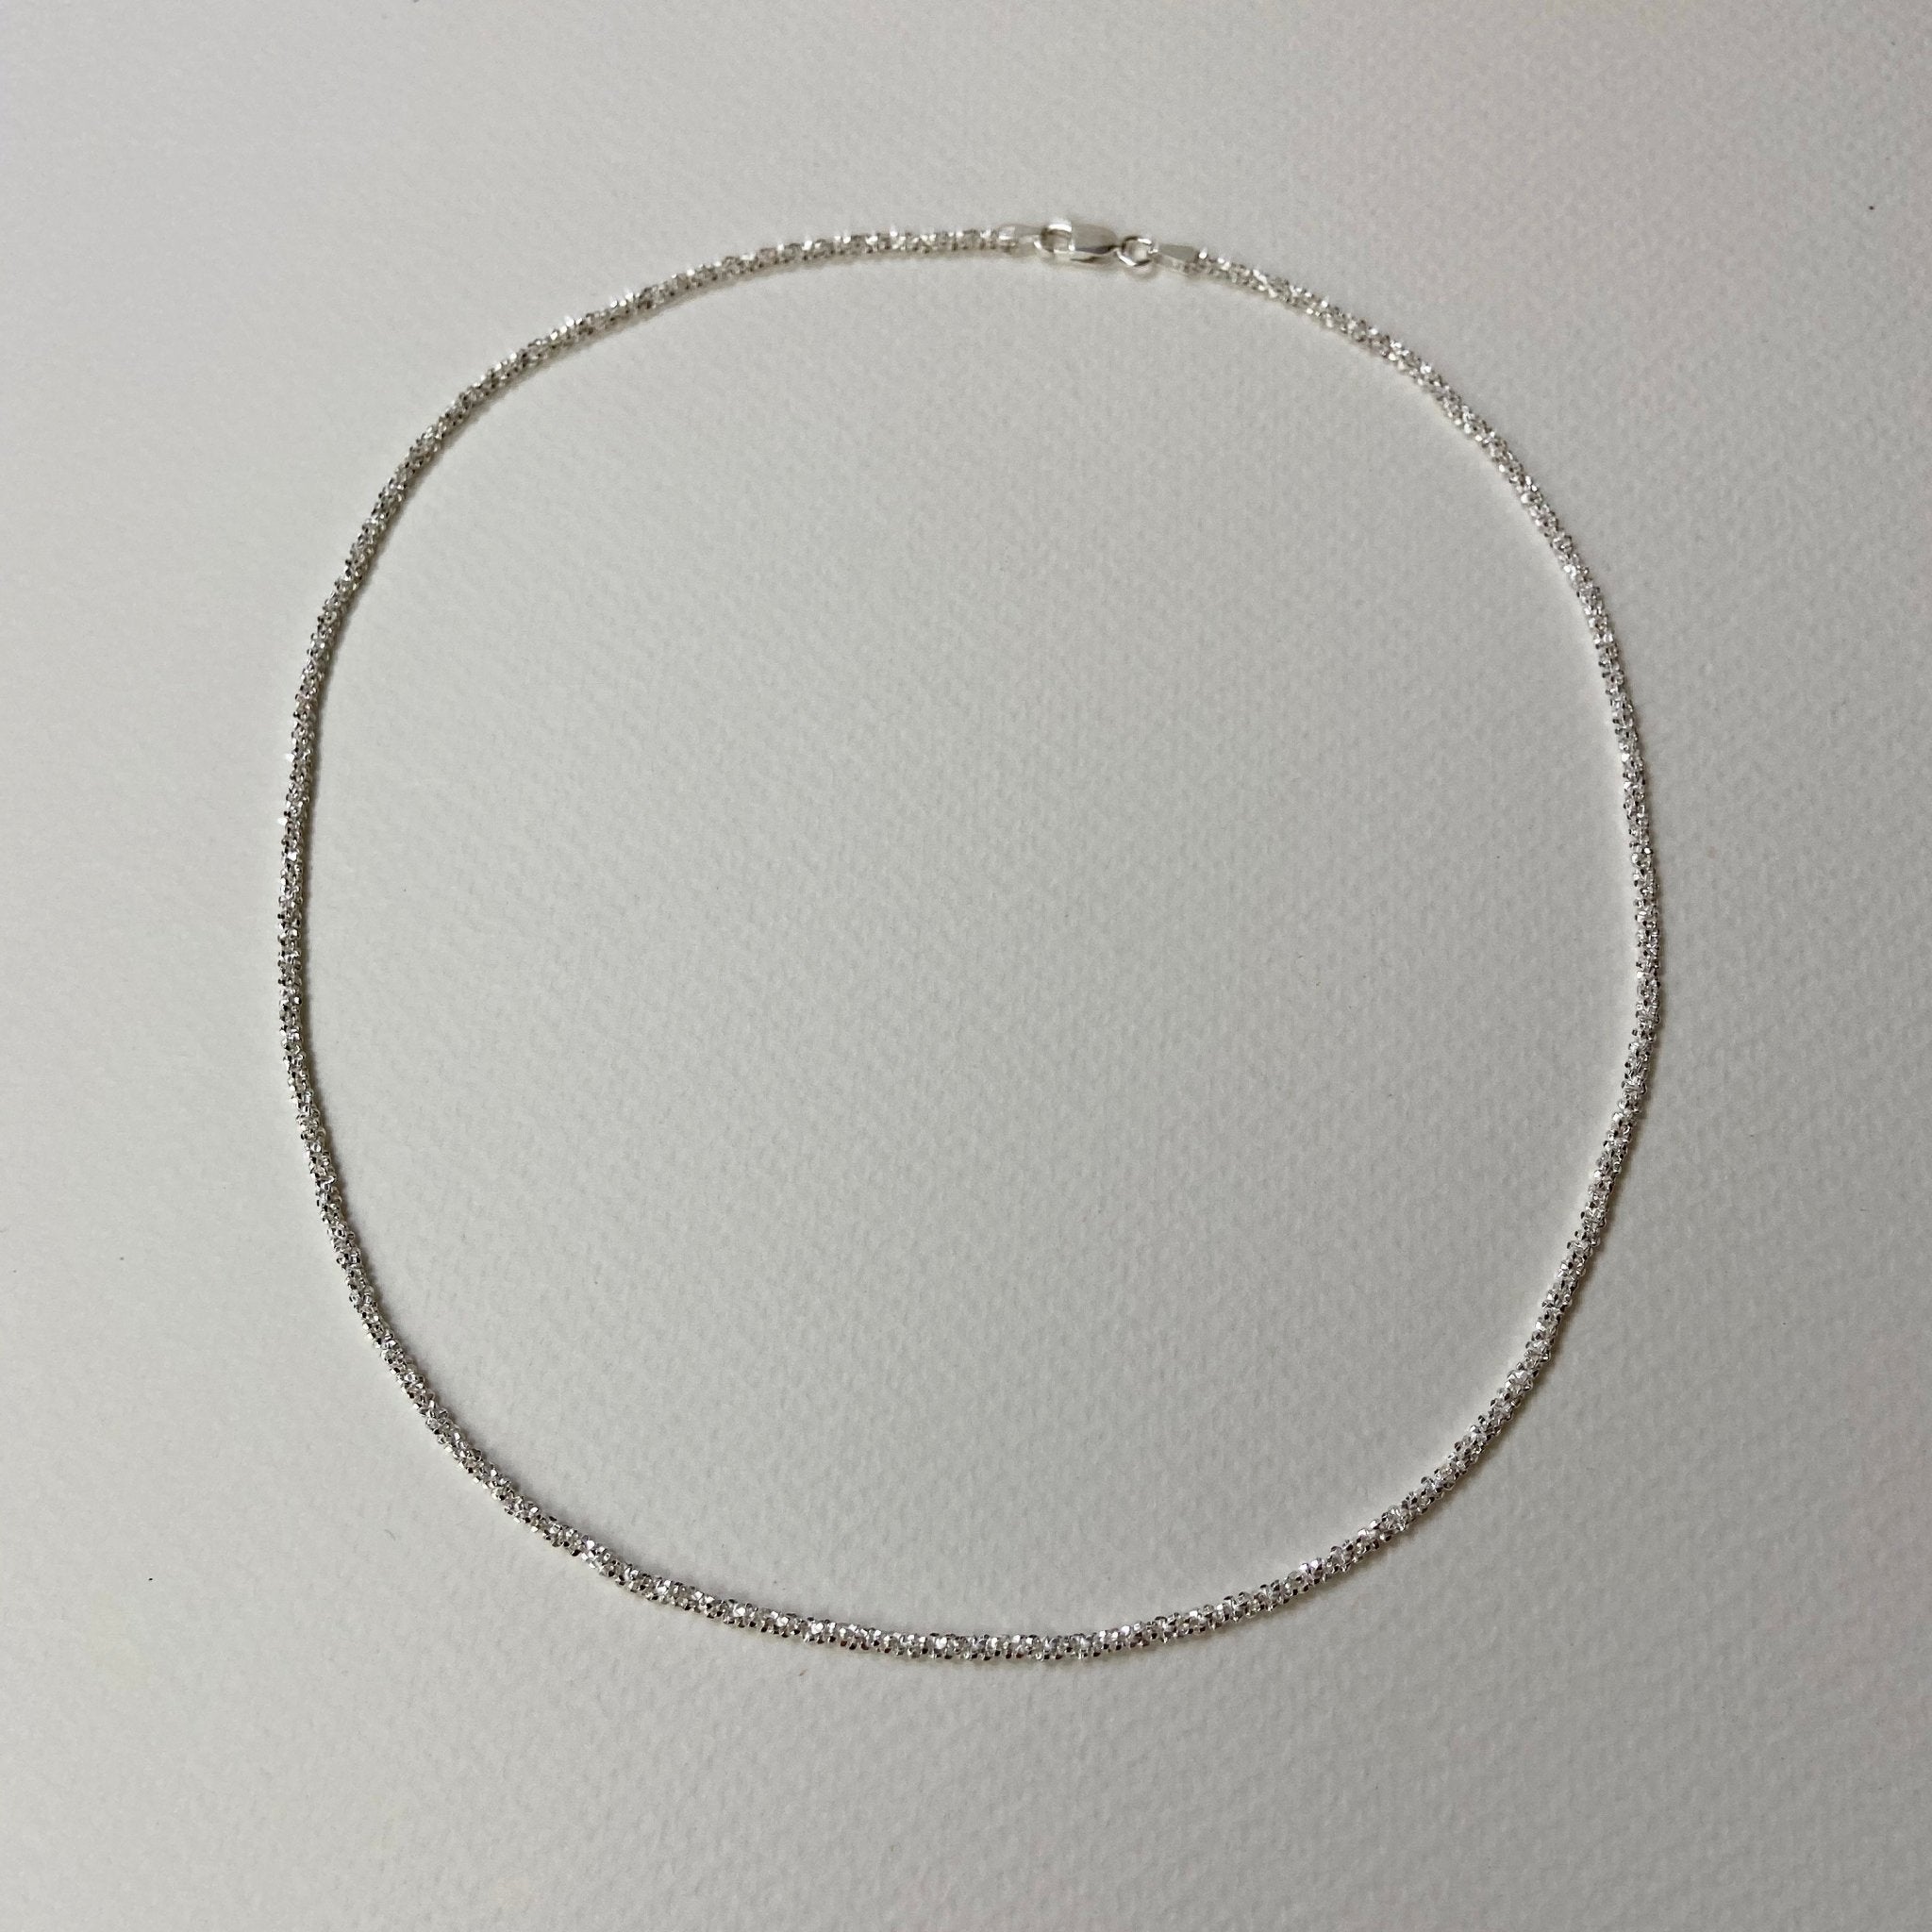 Woven Silver Chain - The Nancy Smillie Shop - Art, Jewellery & Designer Gifts Glasgow